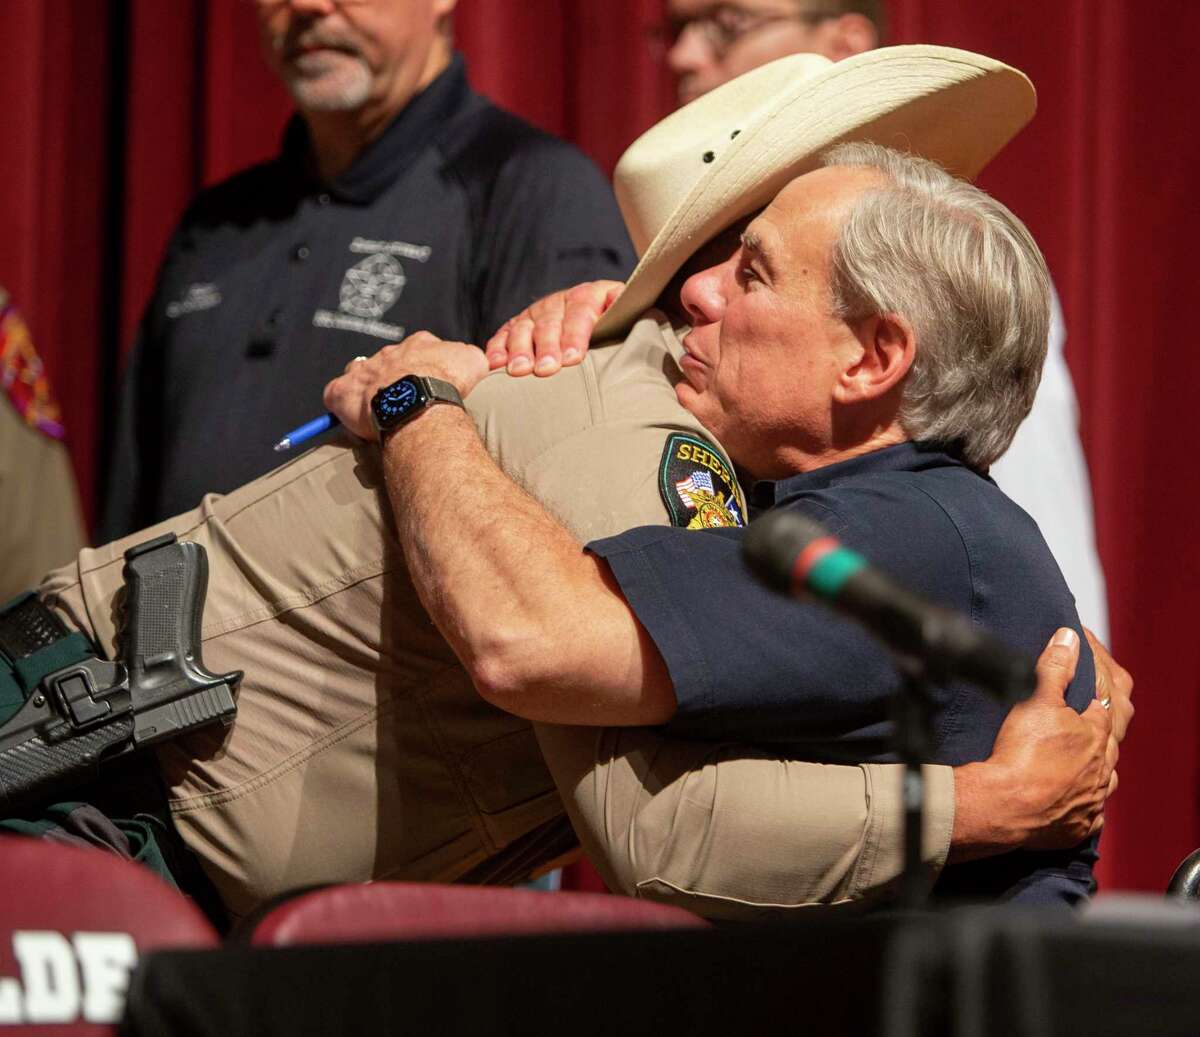 Uvalde County Sheriff Ruben Nolasco, left, hugs Gov. Greg Abbott Wednesday May 25, 2022 in Uvalde, Texas after the governor held a press conference to discuss the elementary school shooting that happened Tuesday. Authorities say Salvador Rolando Ramos, 18, opened fire Tuesday in a 4th grade classroom at Robb Elementary School killing 19 children and two teachers.